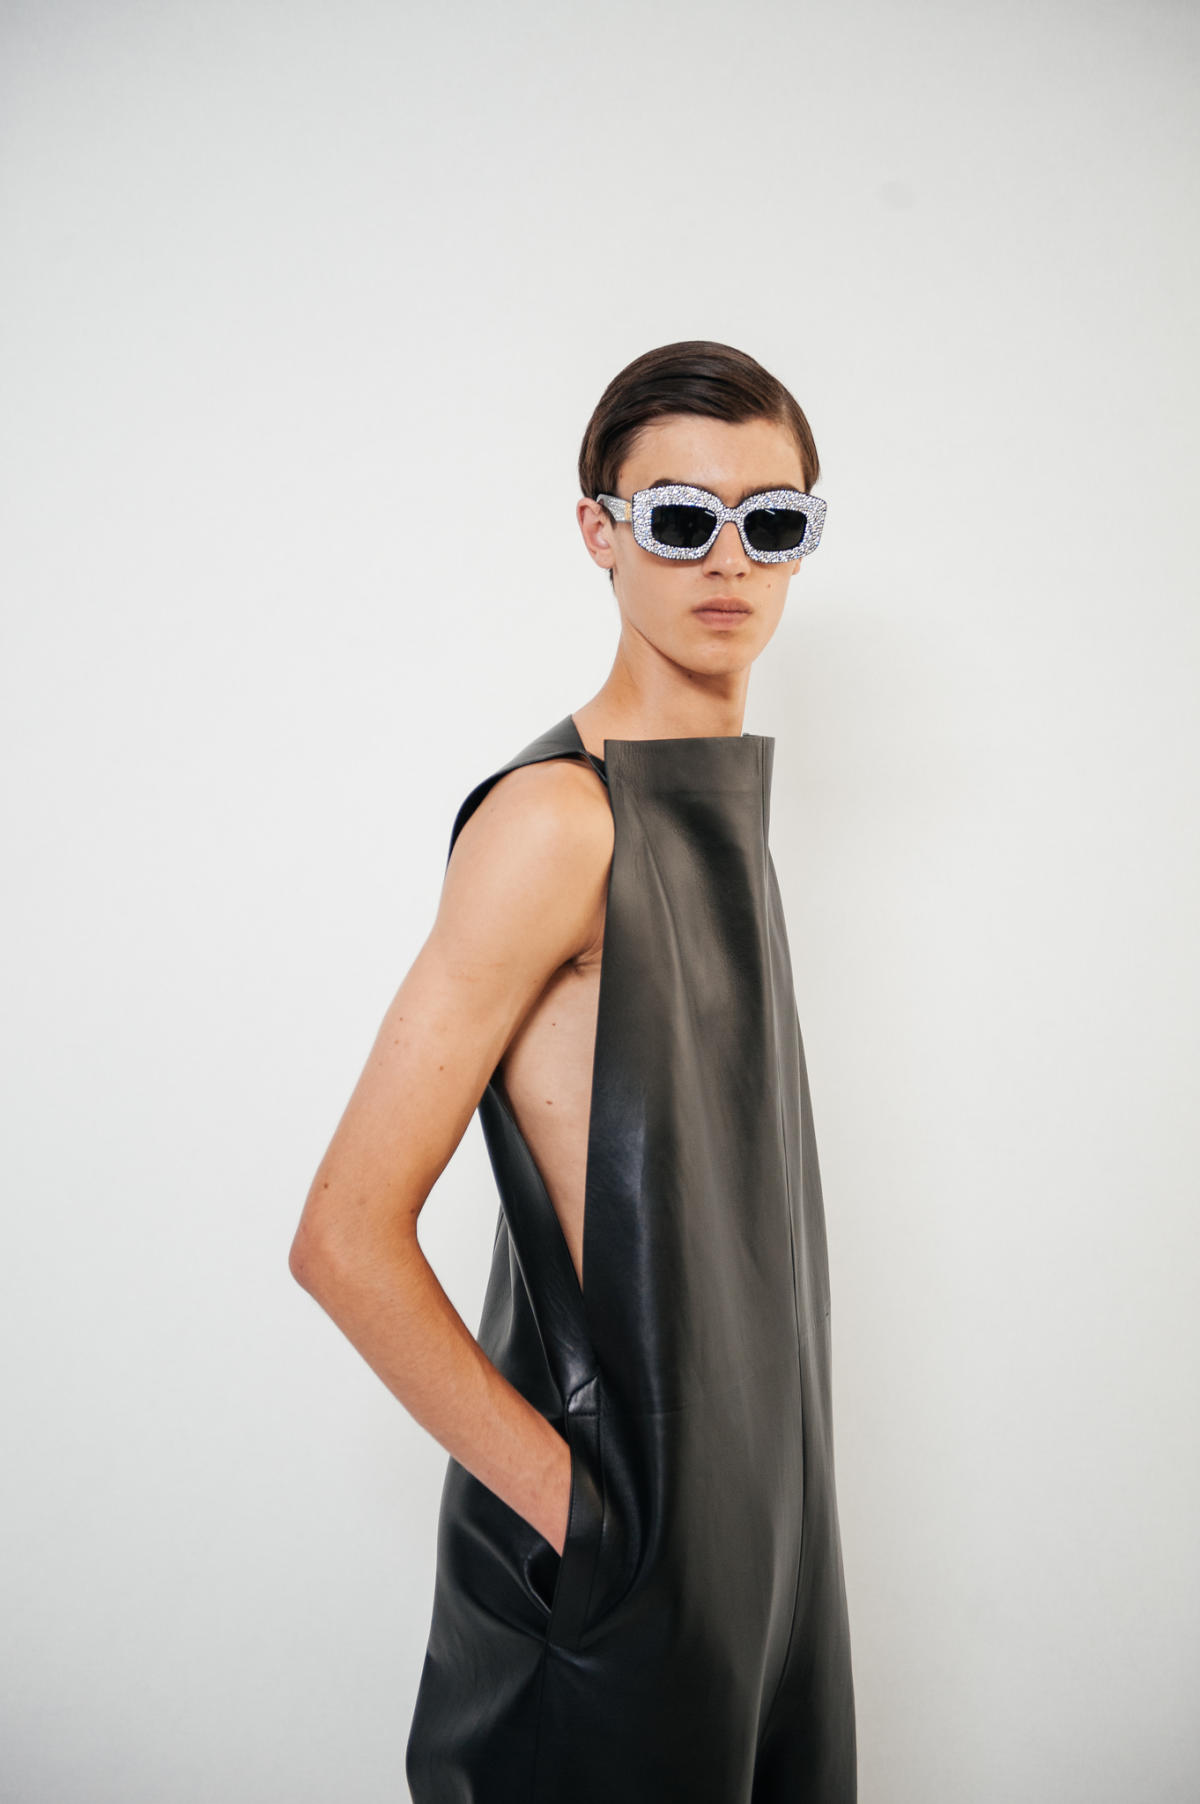 Men’s Skin Is In: Tank Tops Get the High-End Treatment